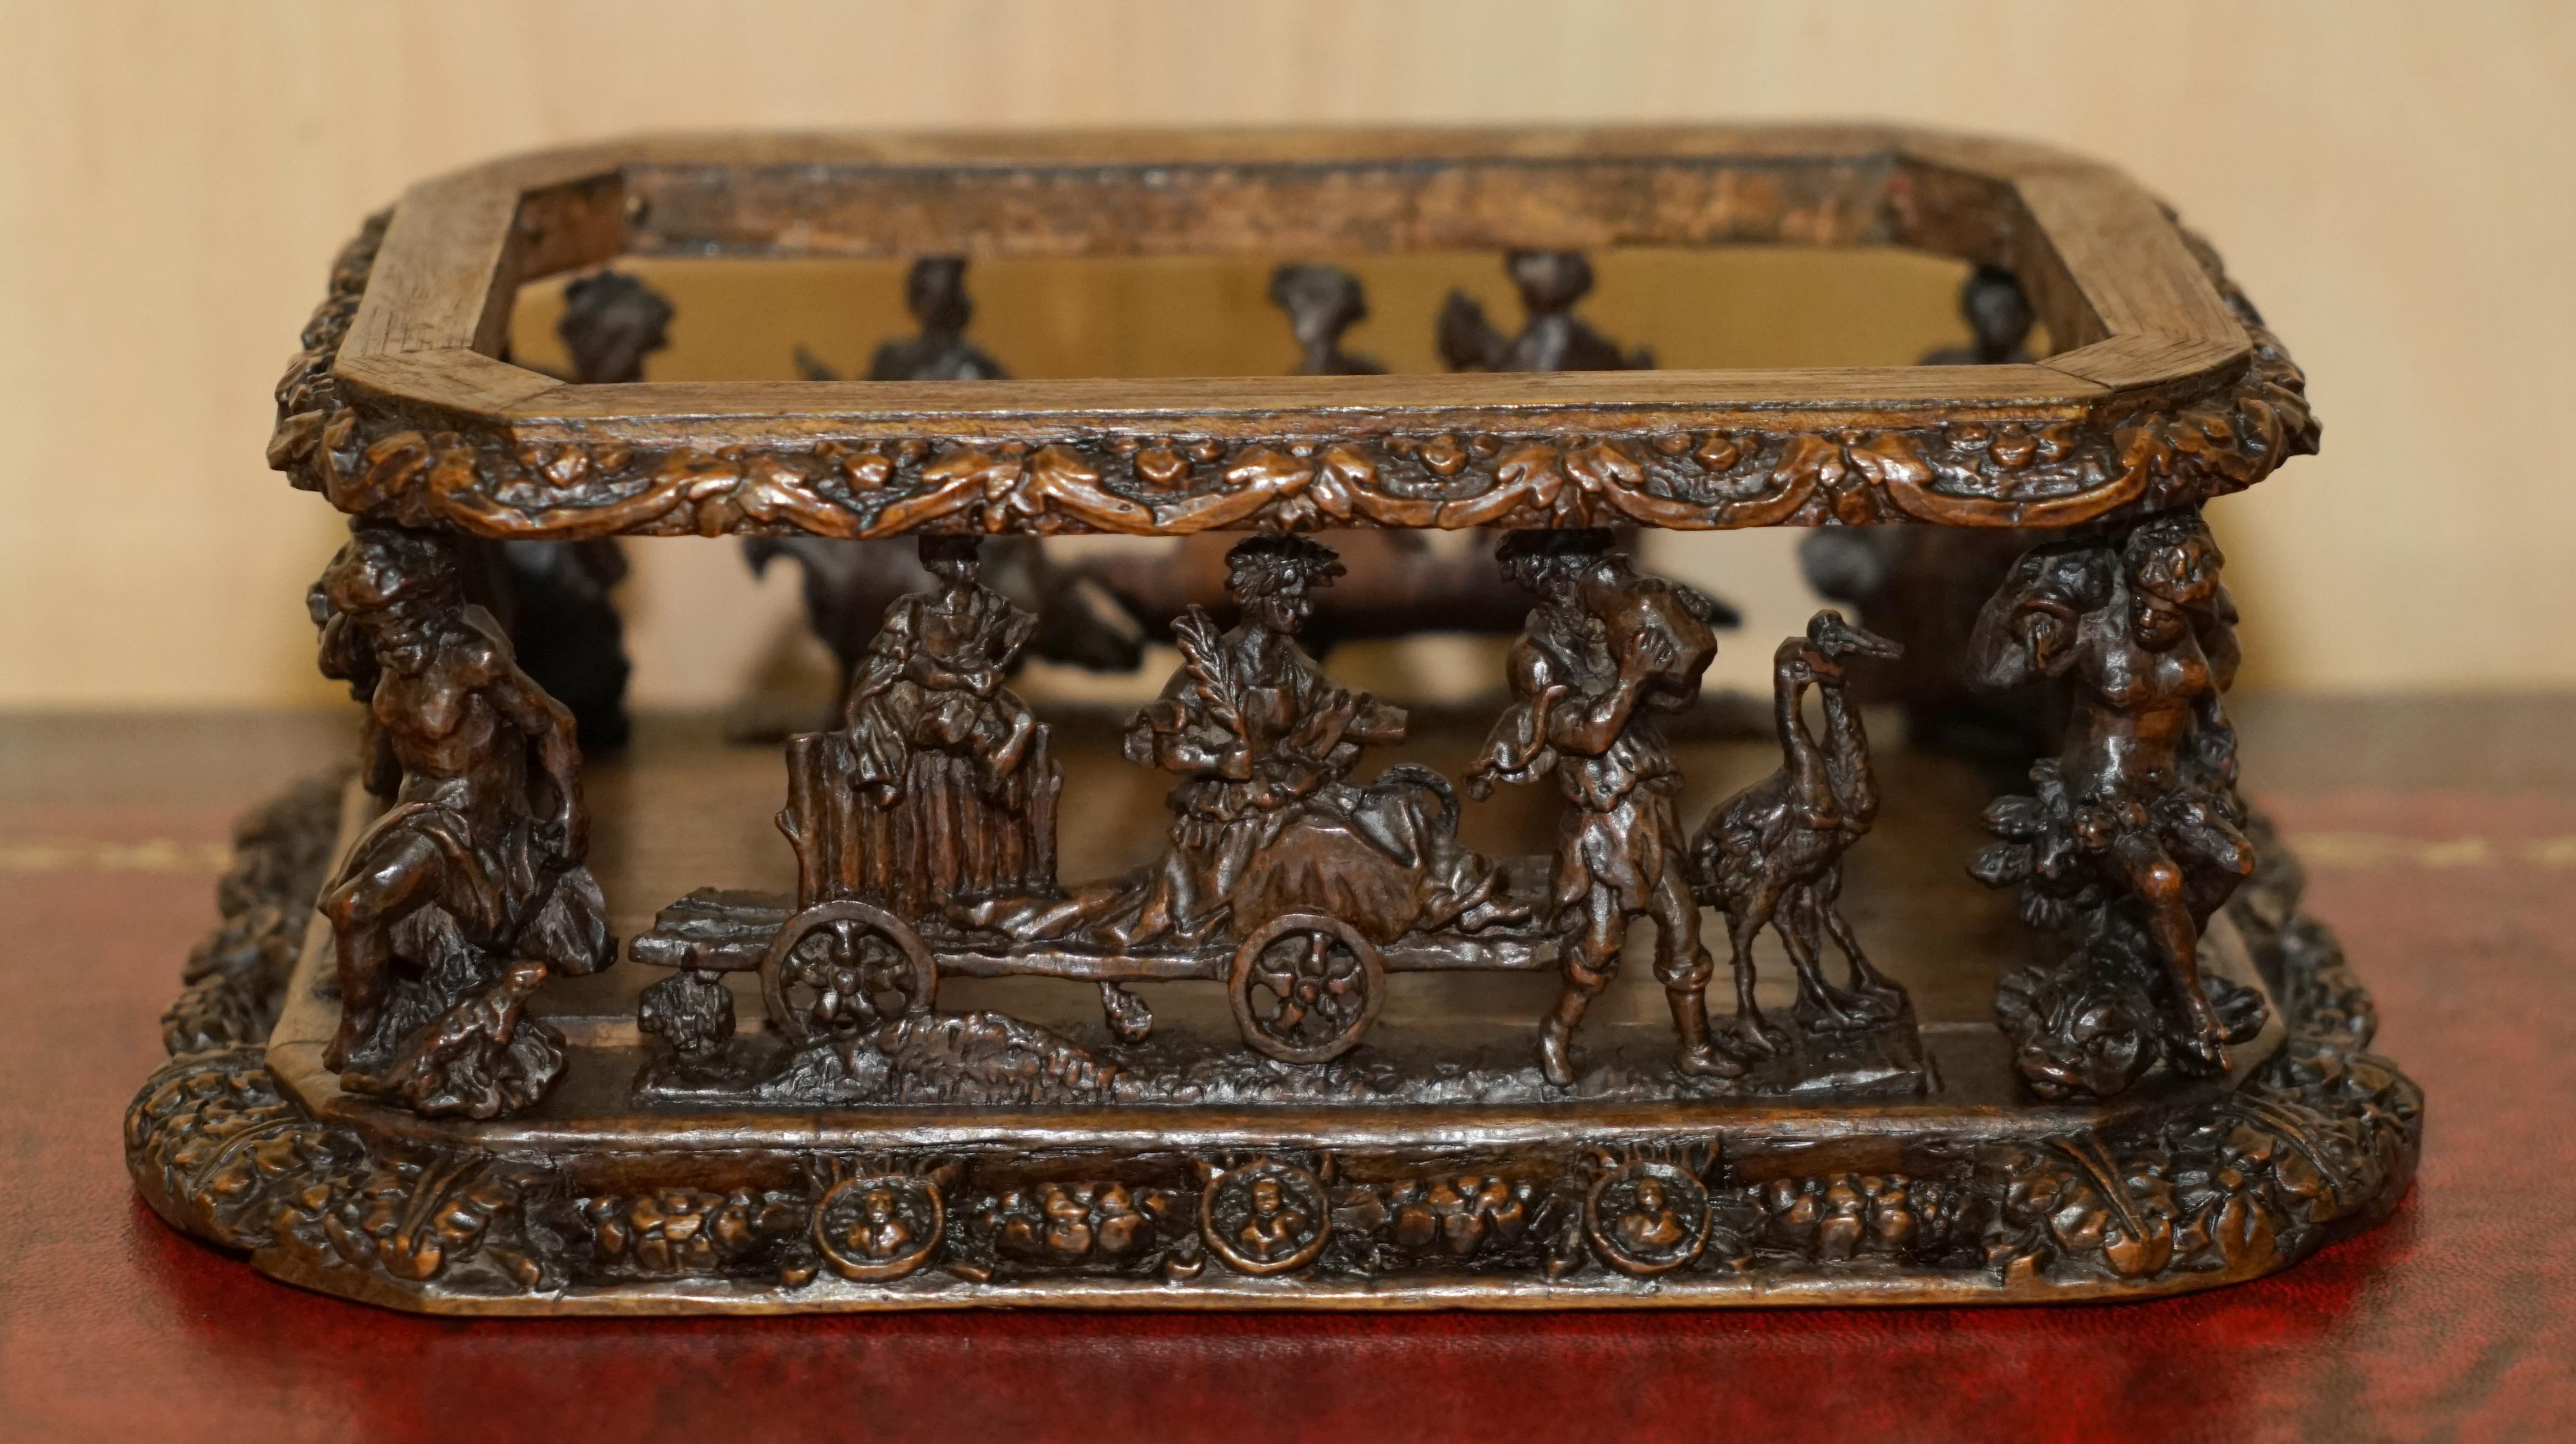 ANTiQUE ITALIAN CIRCA 1840 HEAVILY CARVED BOX DEPICTING STALLION HORSES MUST SEE For Sale 11